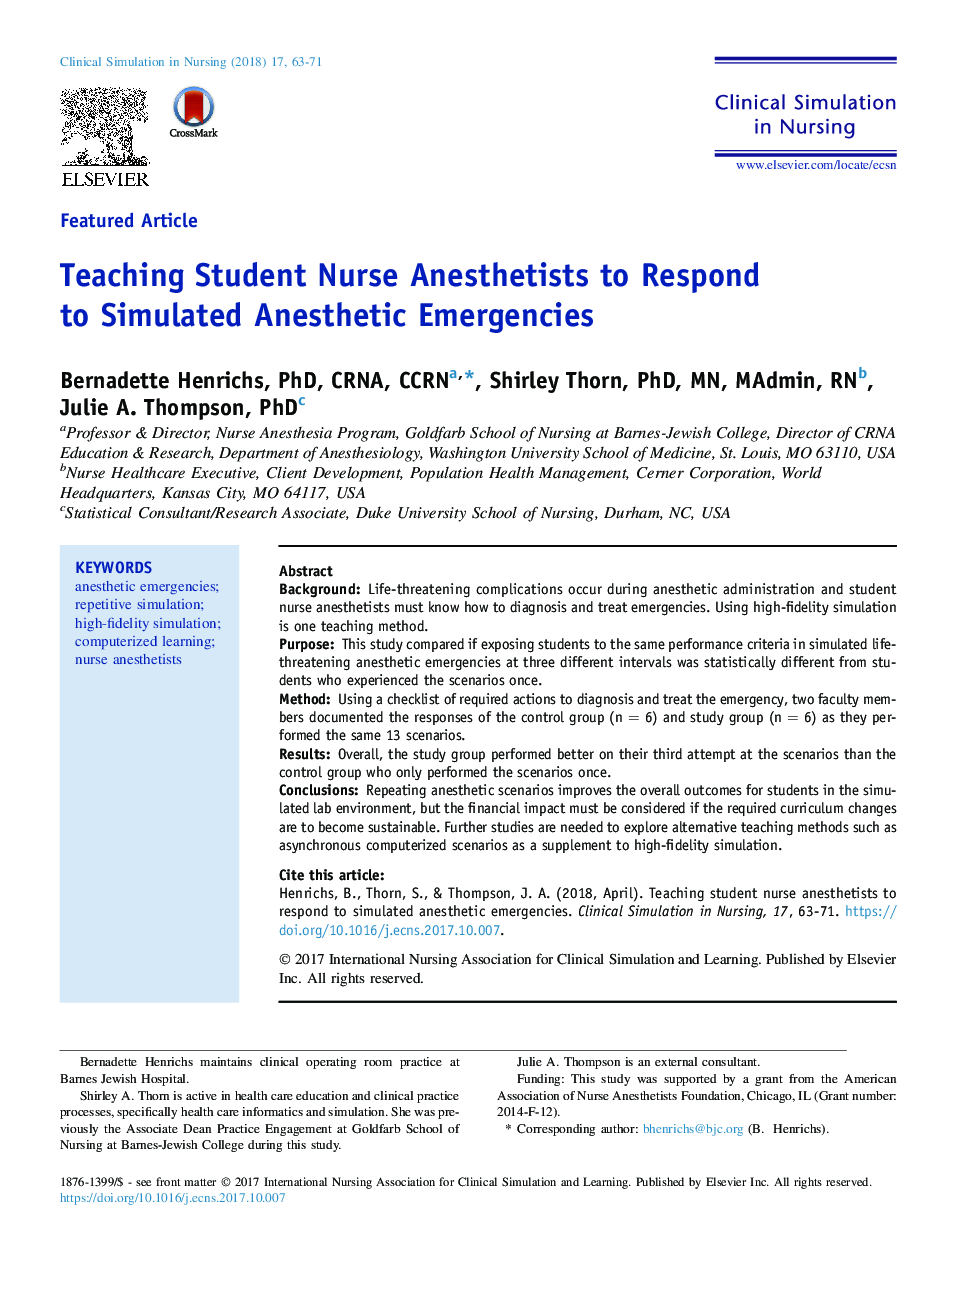 Teaching Student Nurse Anesthetists to Respond to Simulated Anesthetic Emergencies